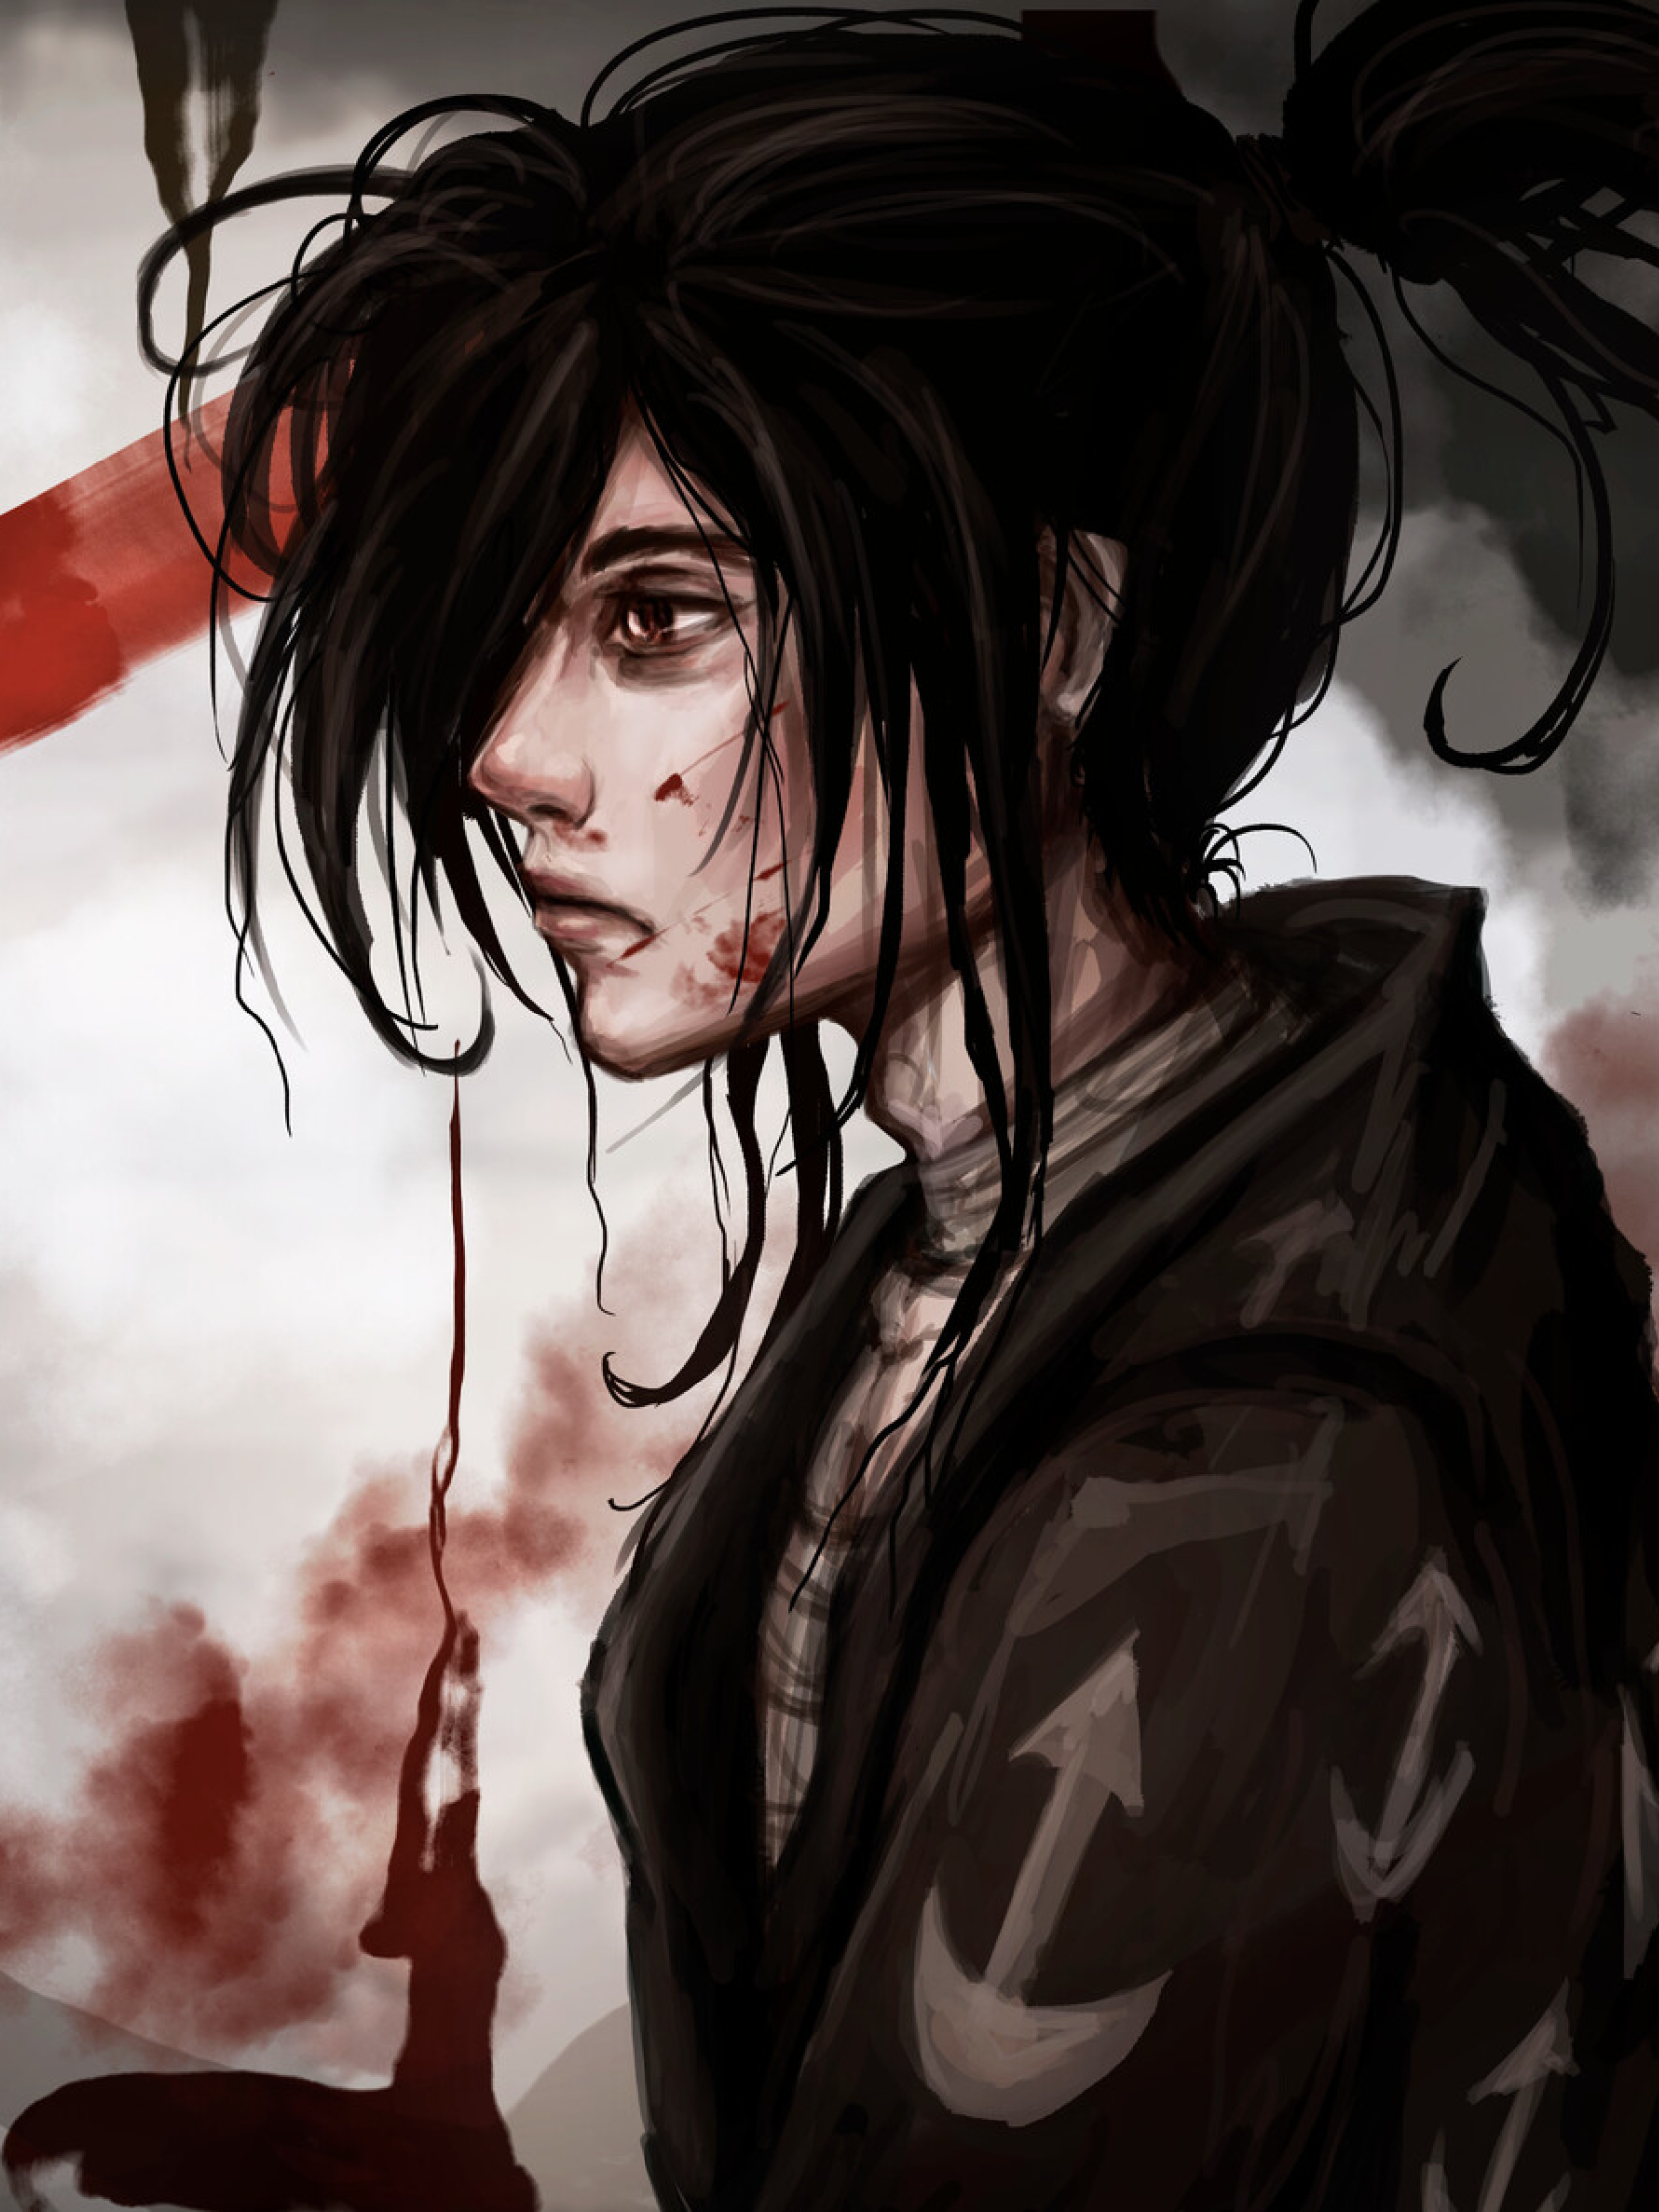 1668x2224 Hyakkimaru In Dororo Anime 1668x2224 Resolution Wallpaper Hd Anime 4k Wallpapers Images Photos And Background Wallpapers Den